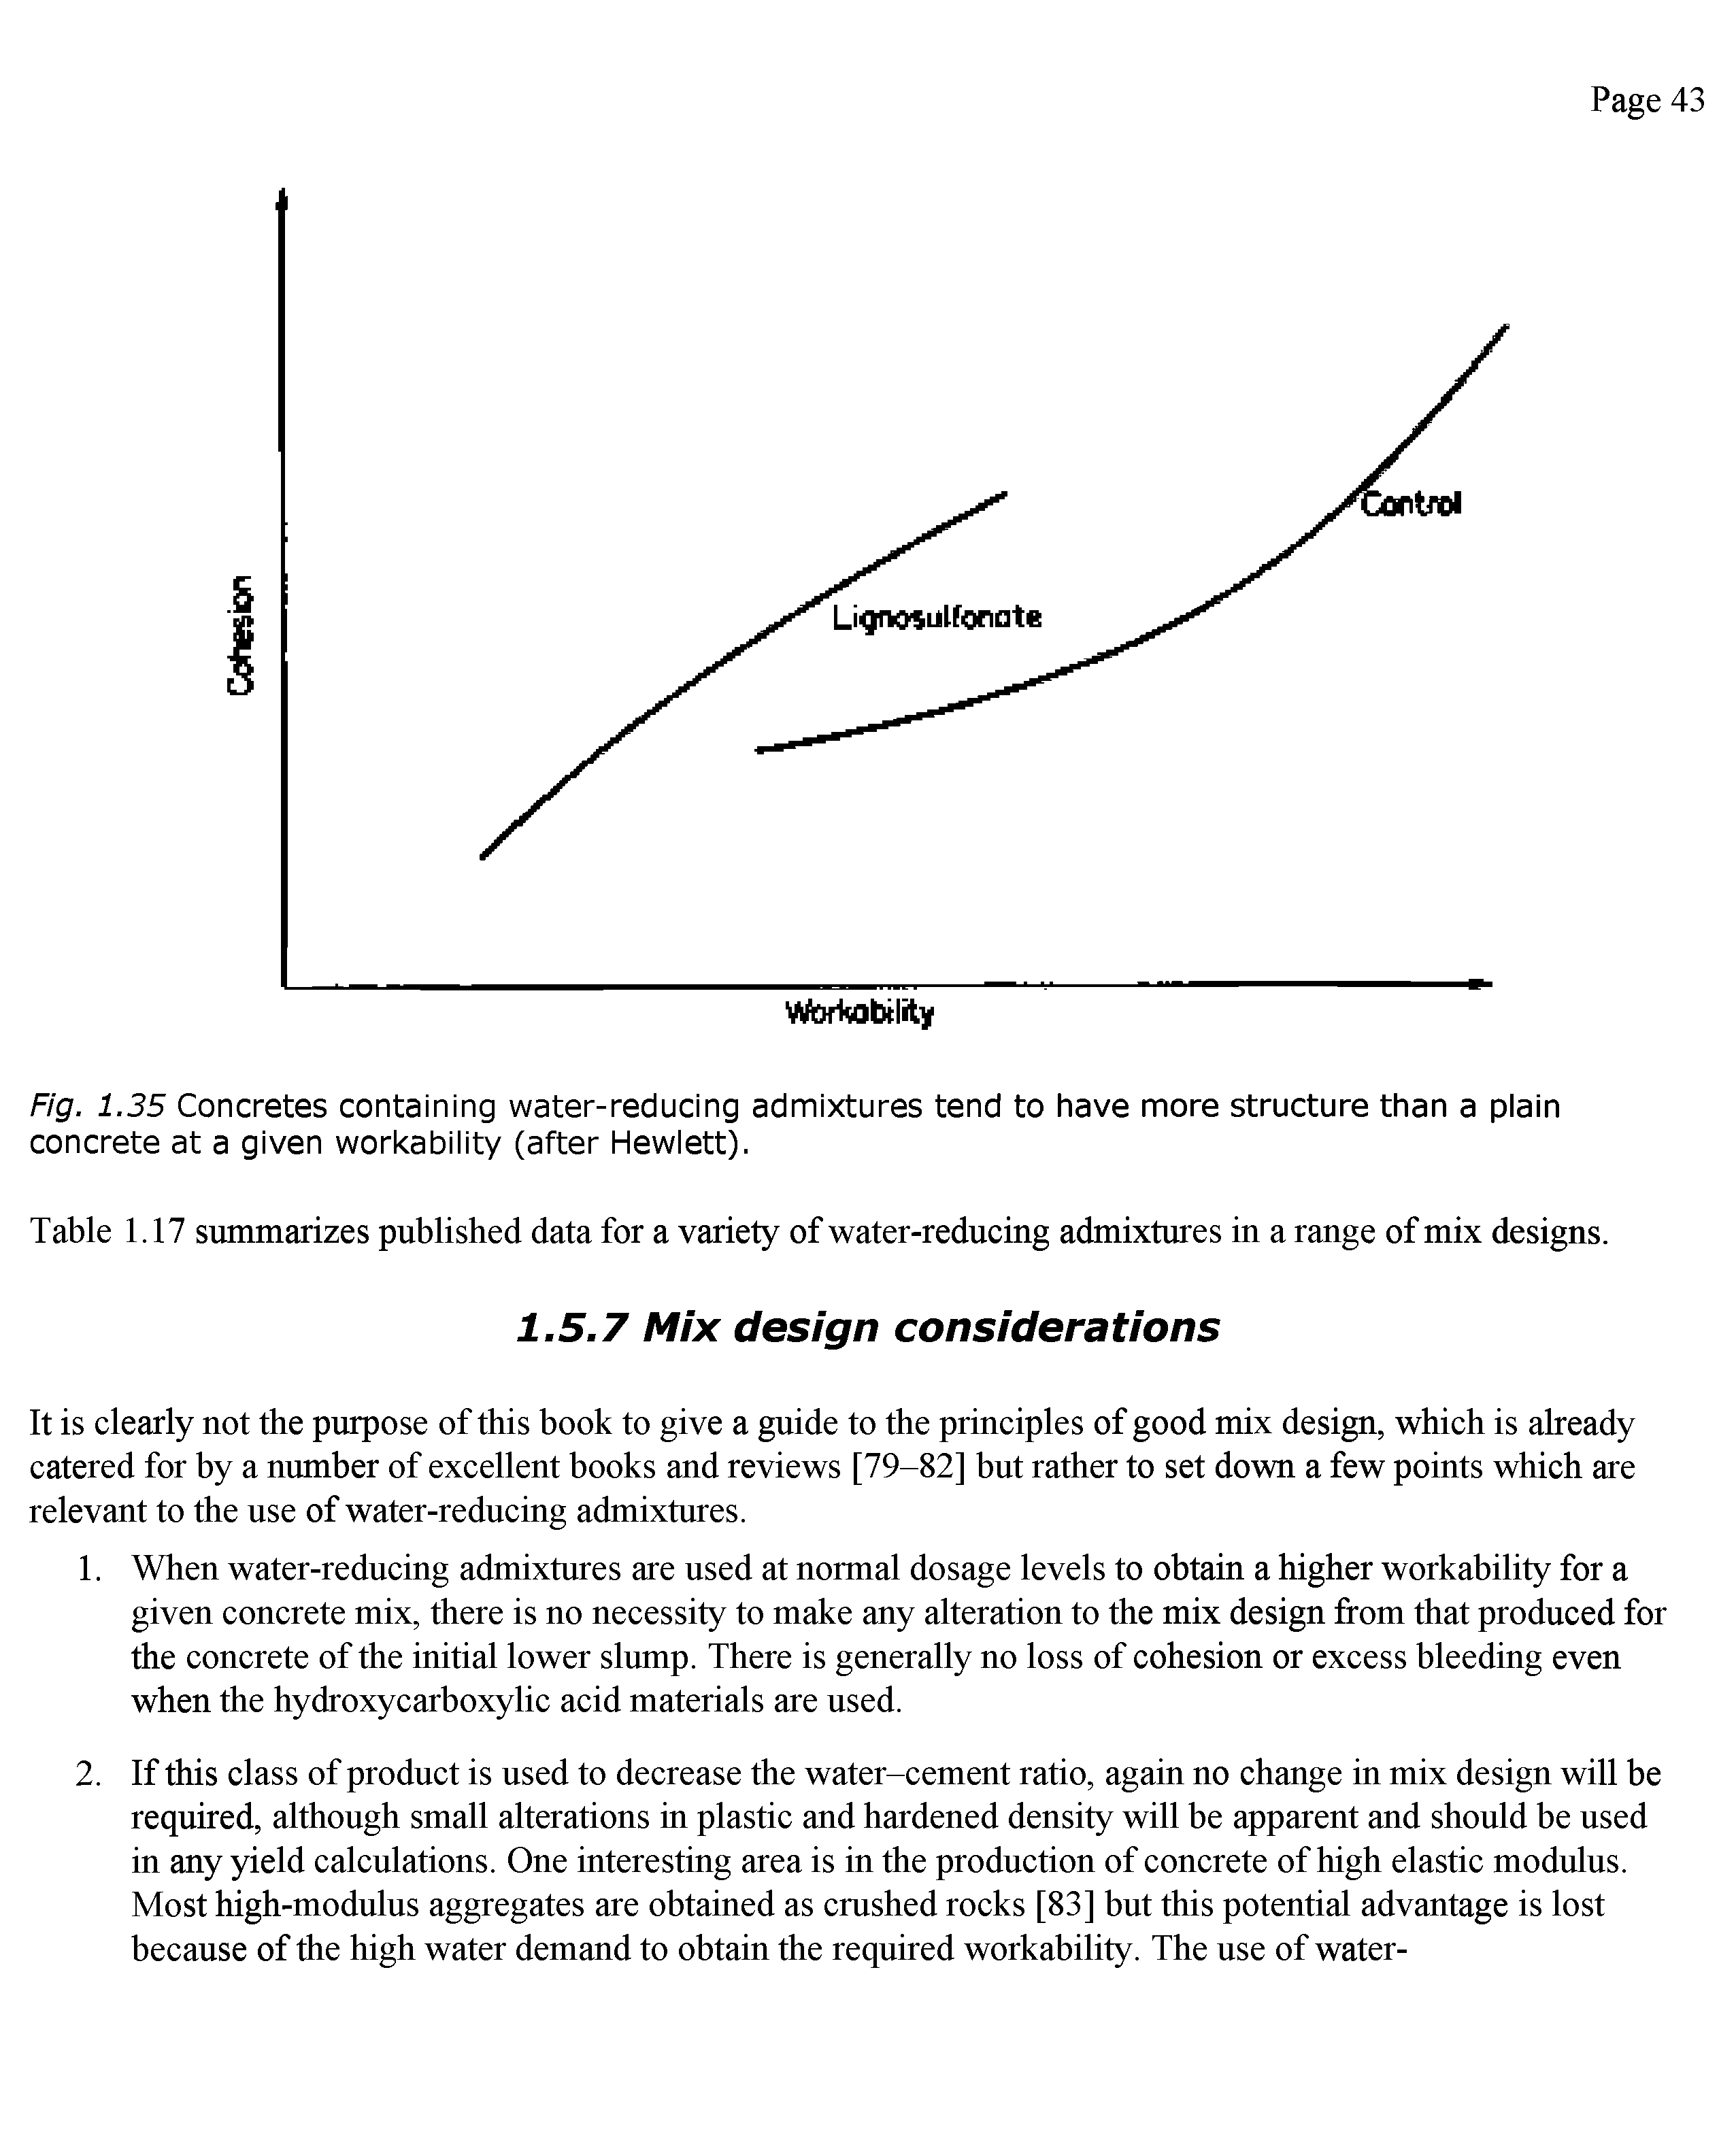 Fig. 1.35 Concretes containing water-reducing admixtures tend to have more structure than a plain concrete at a given workability (after Hewlett).